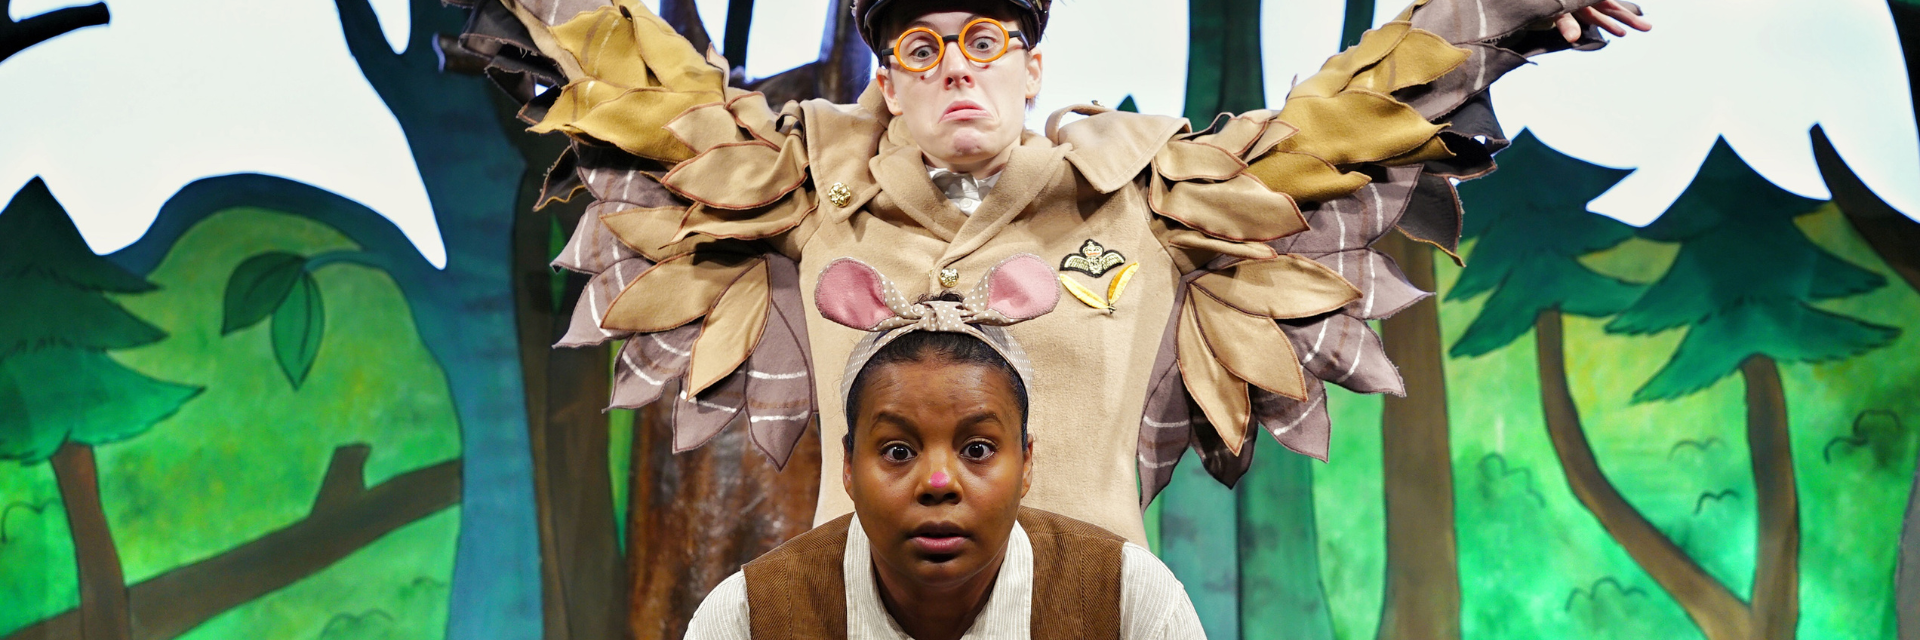 A woman dressed as The Mouse from The Gruffalo dressed in a white top and brown waistcoat. Behind her is a man dressed as an Owl, with his arms raised, ready to pounce.